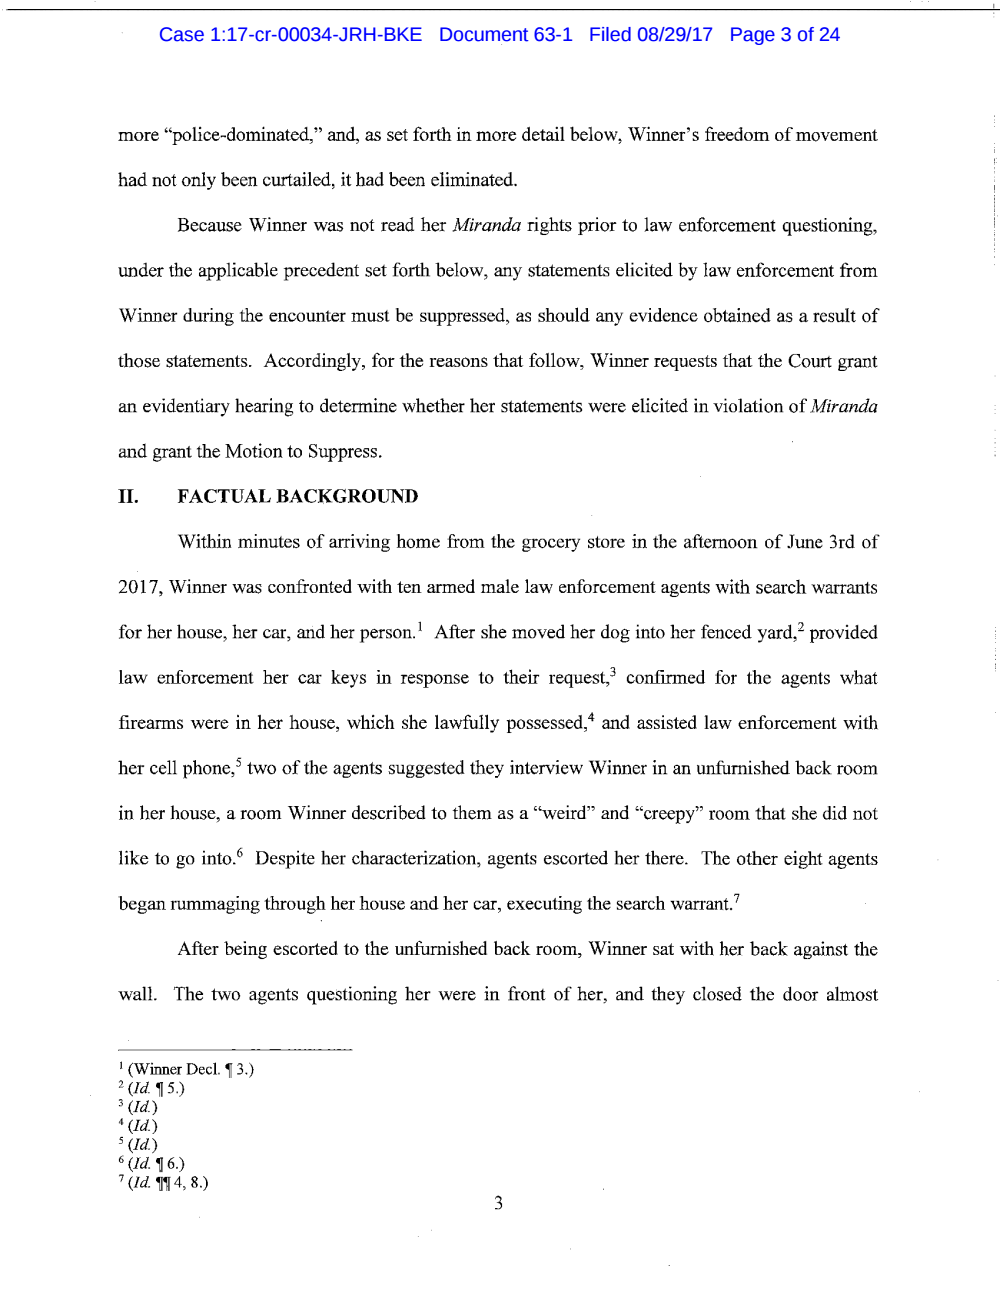 Page 3 from Reality Winner Memo in Support of Motion to Suppress